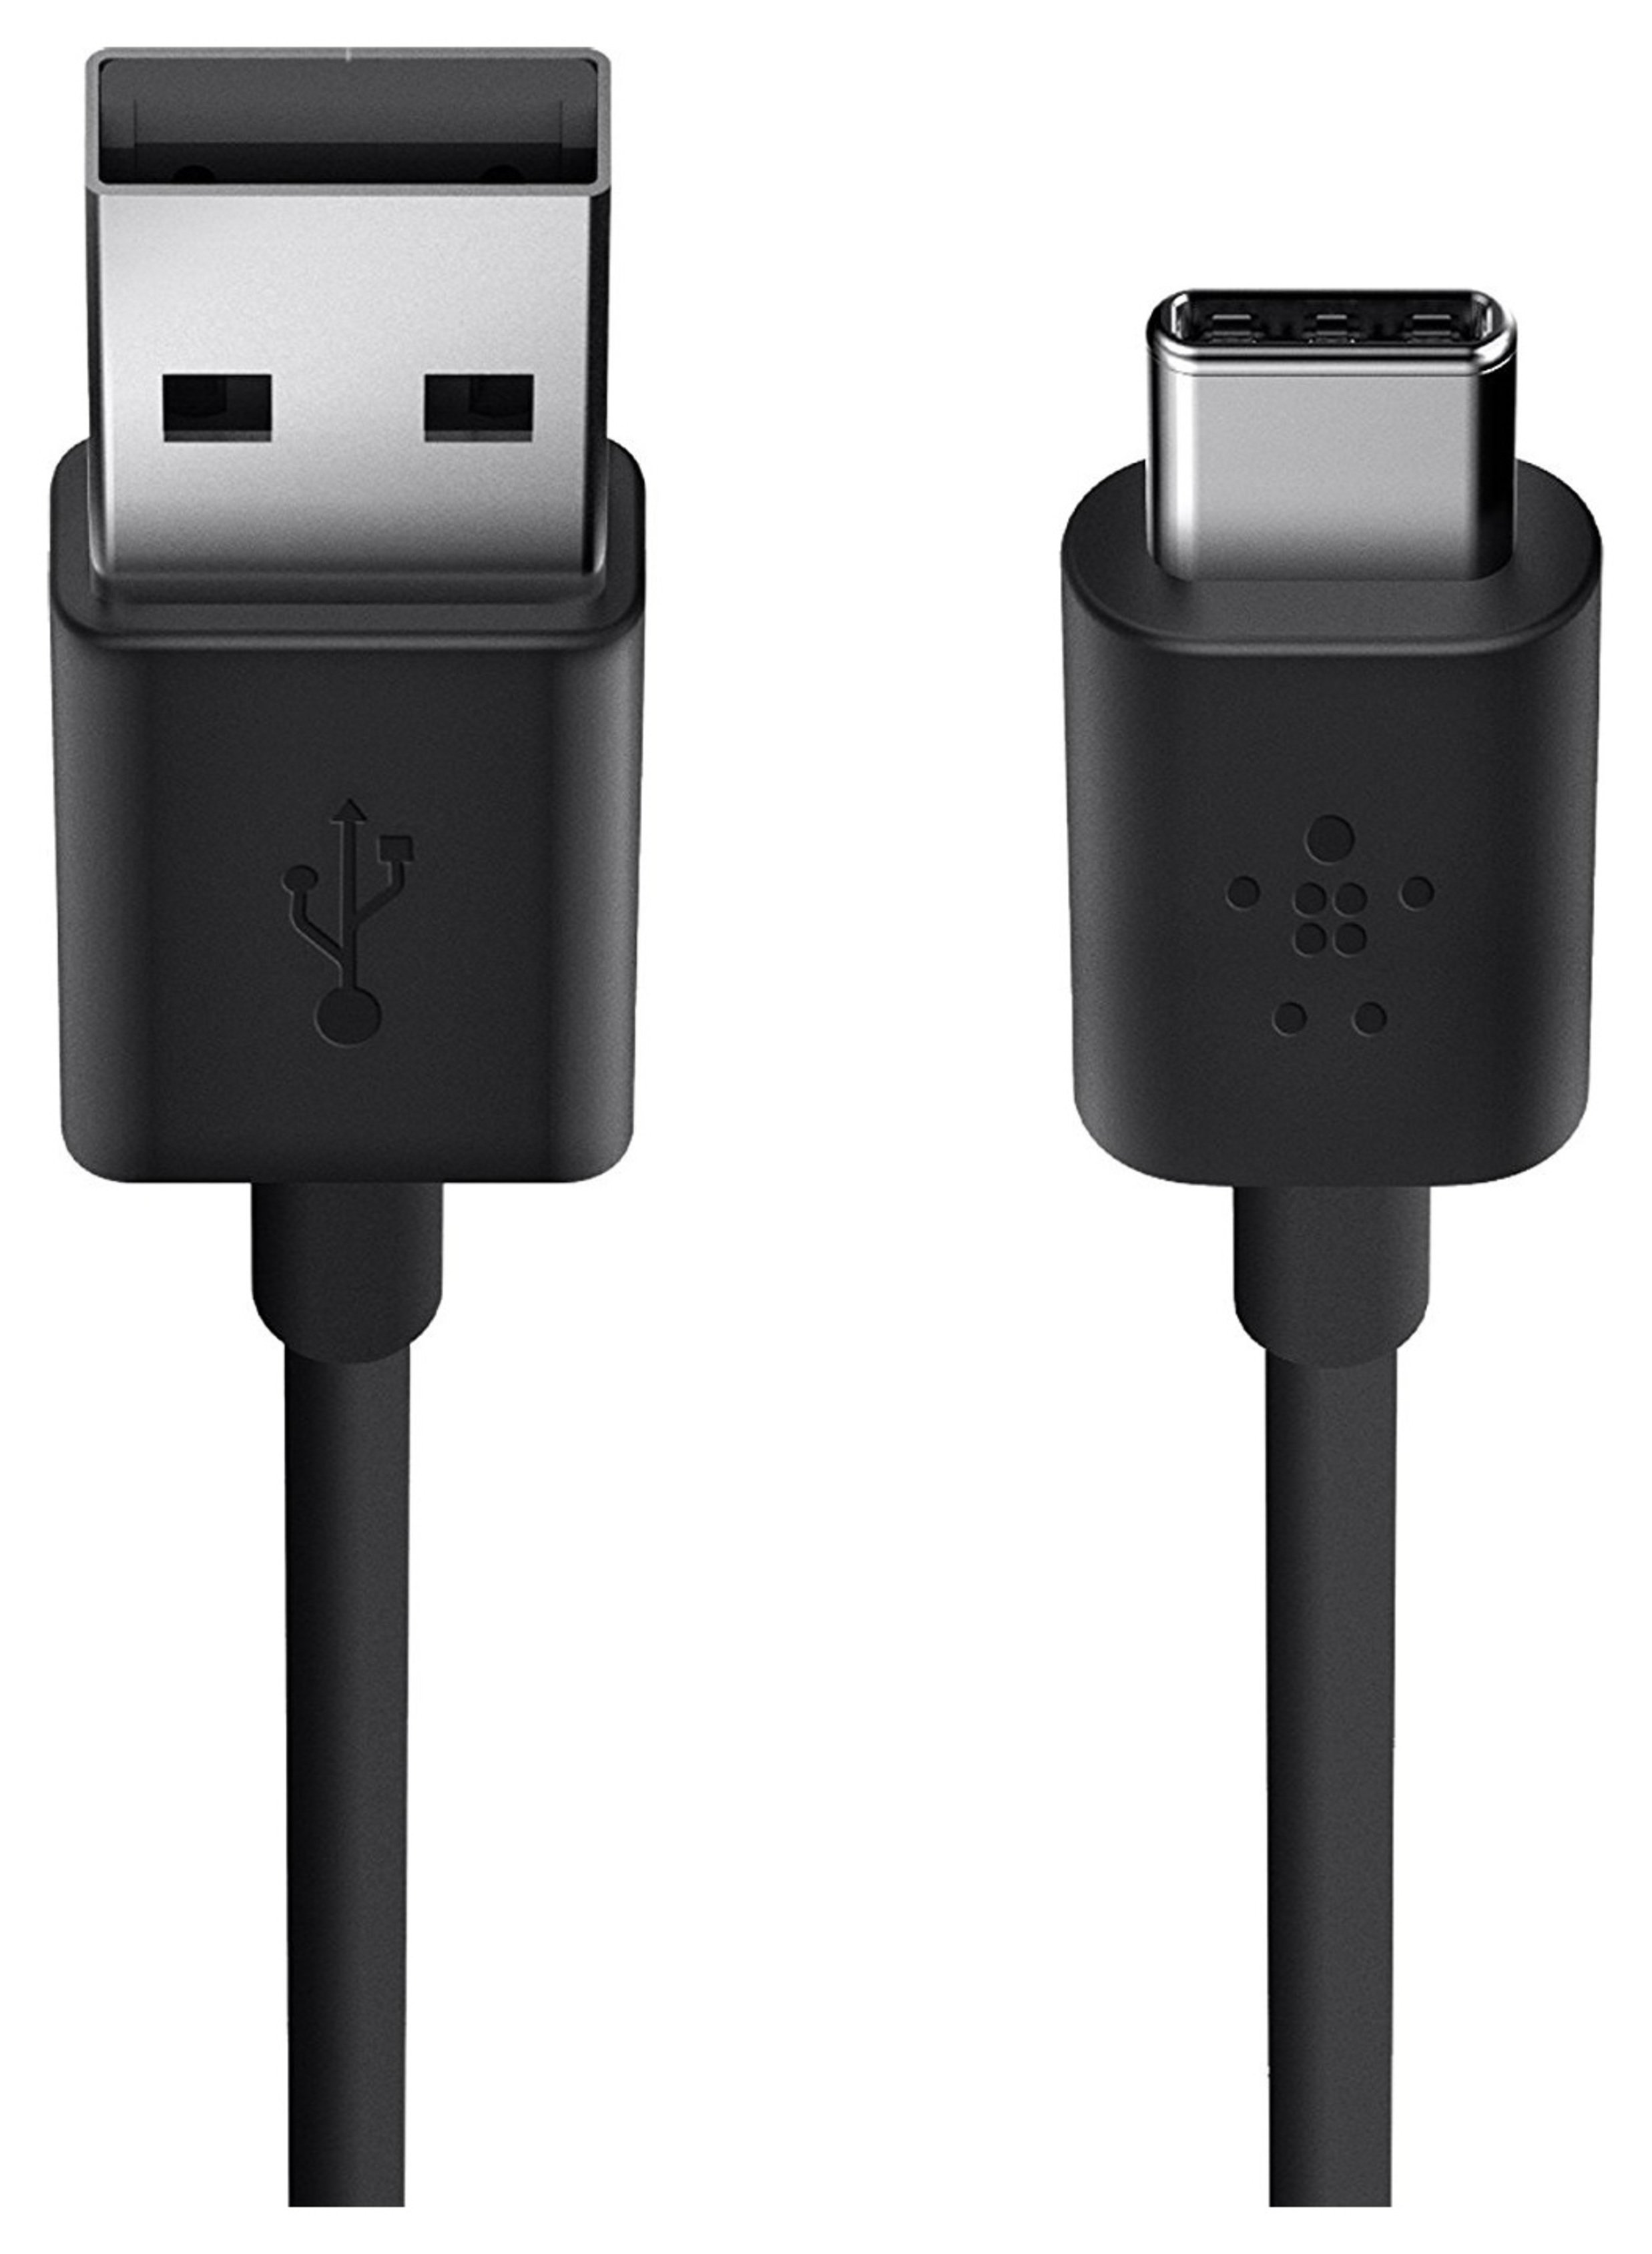 Belkin Mixit USB-C to USB-A Cable - Black.